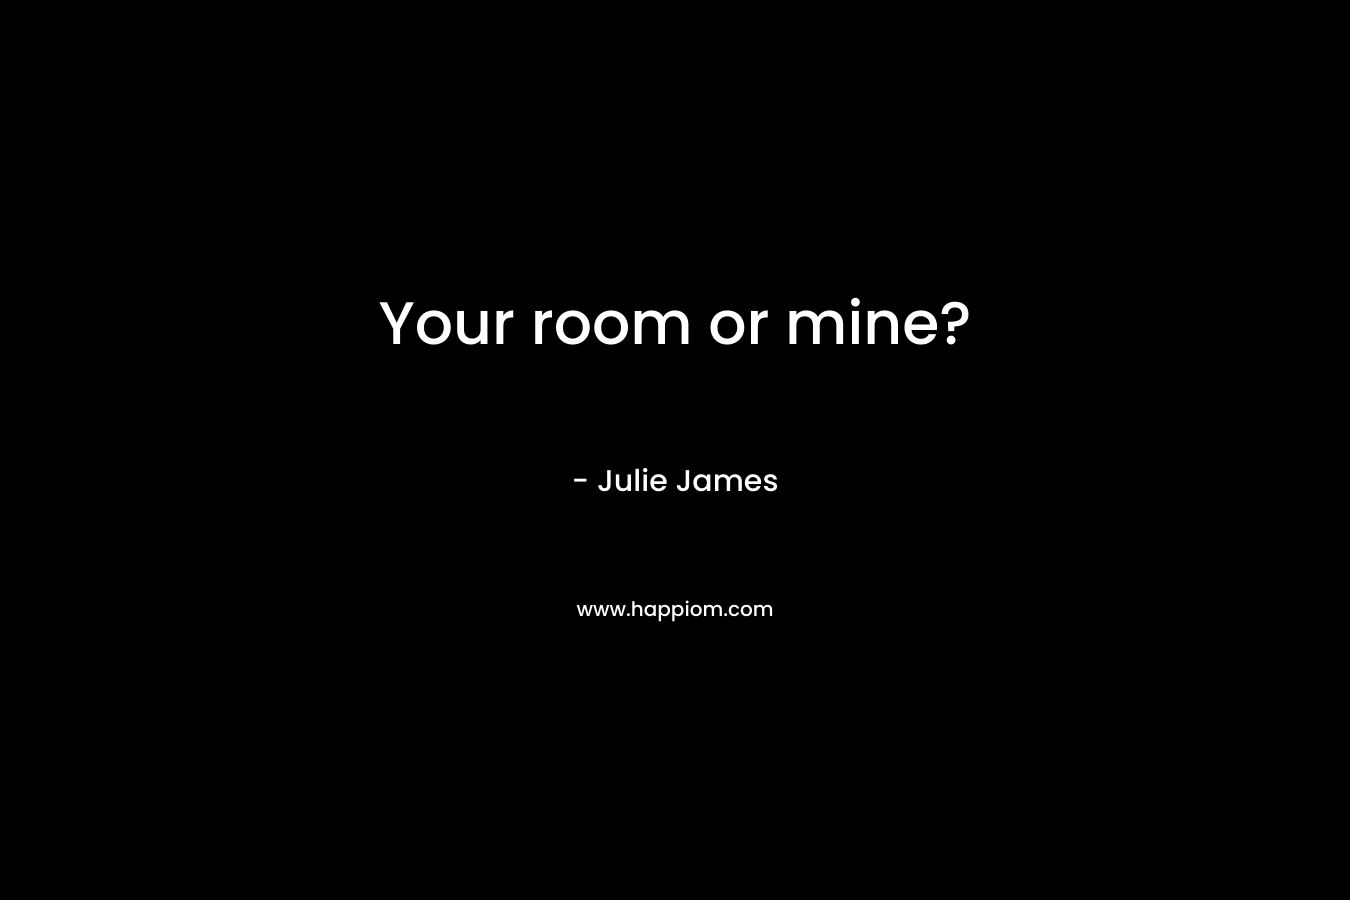 Your room or mine?